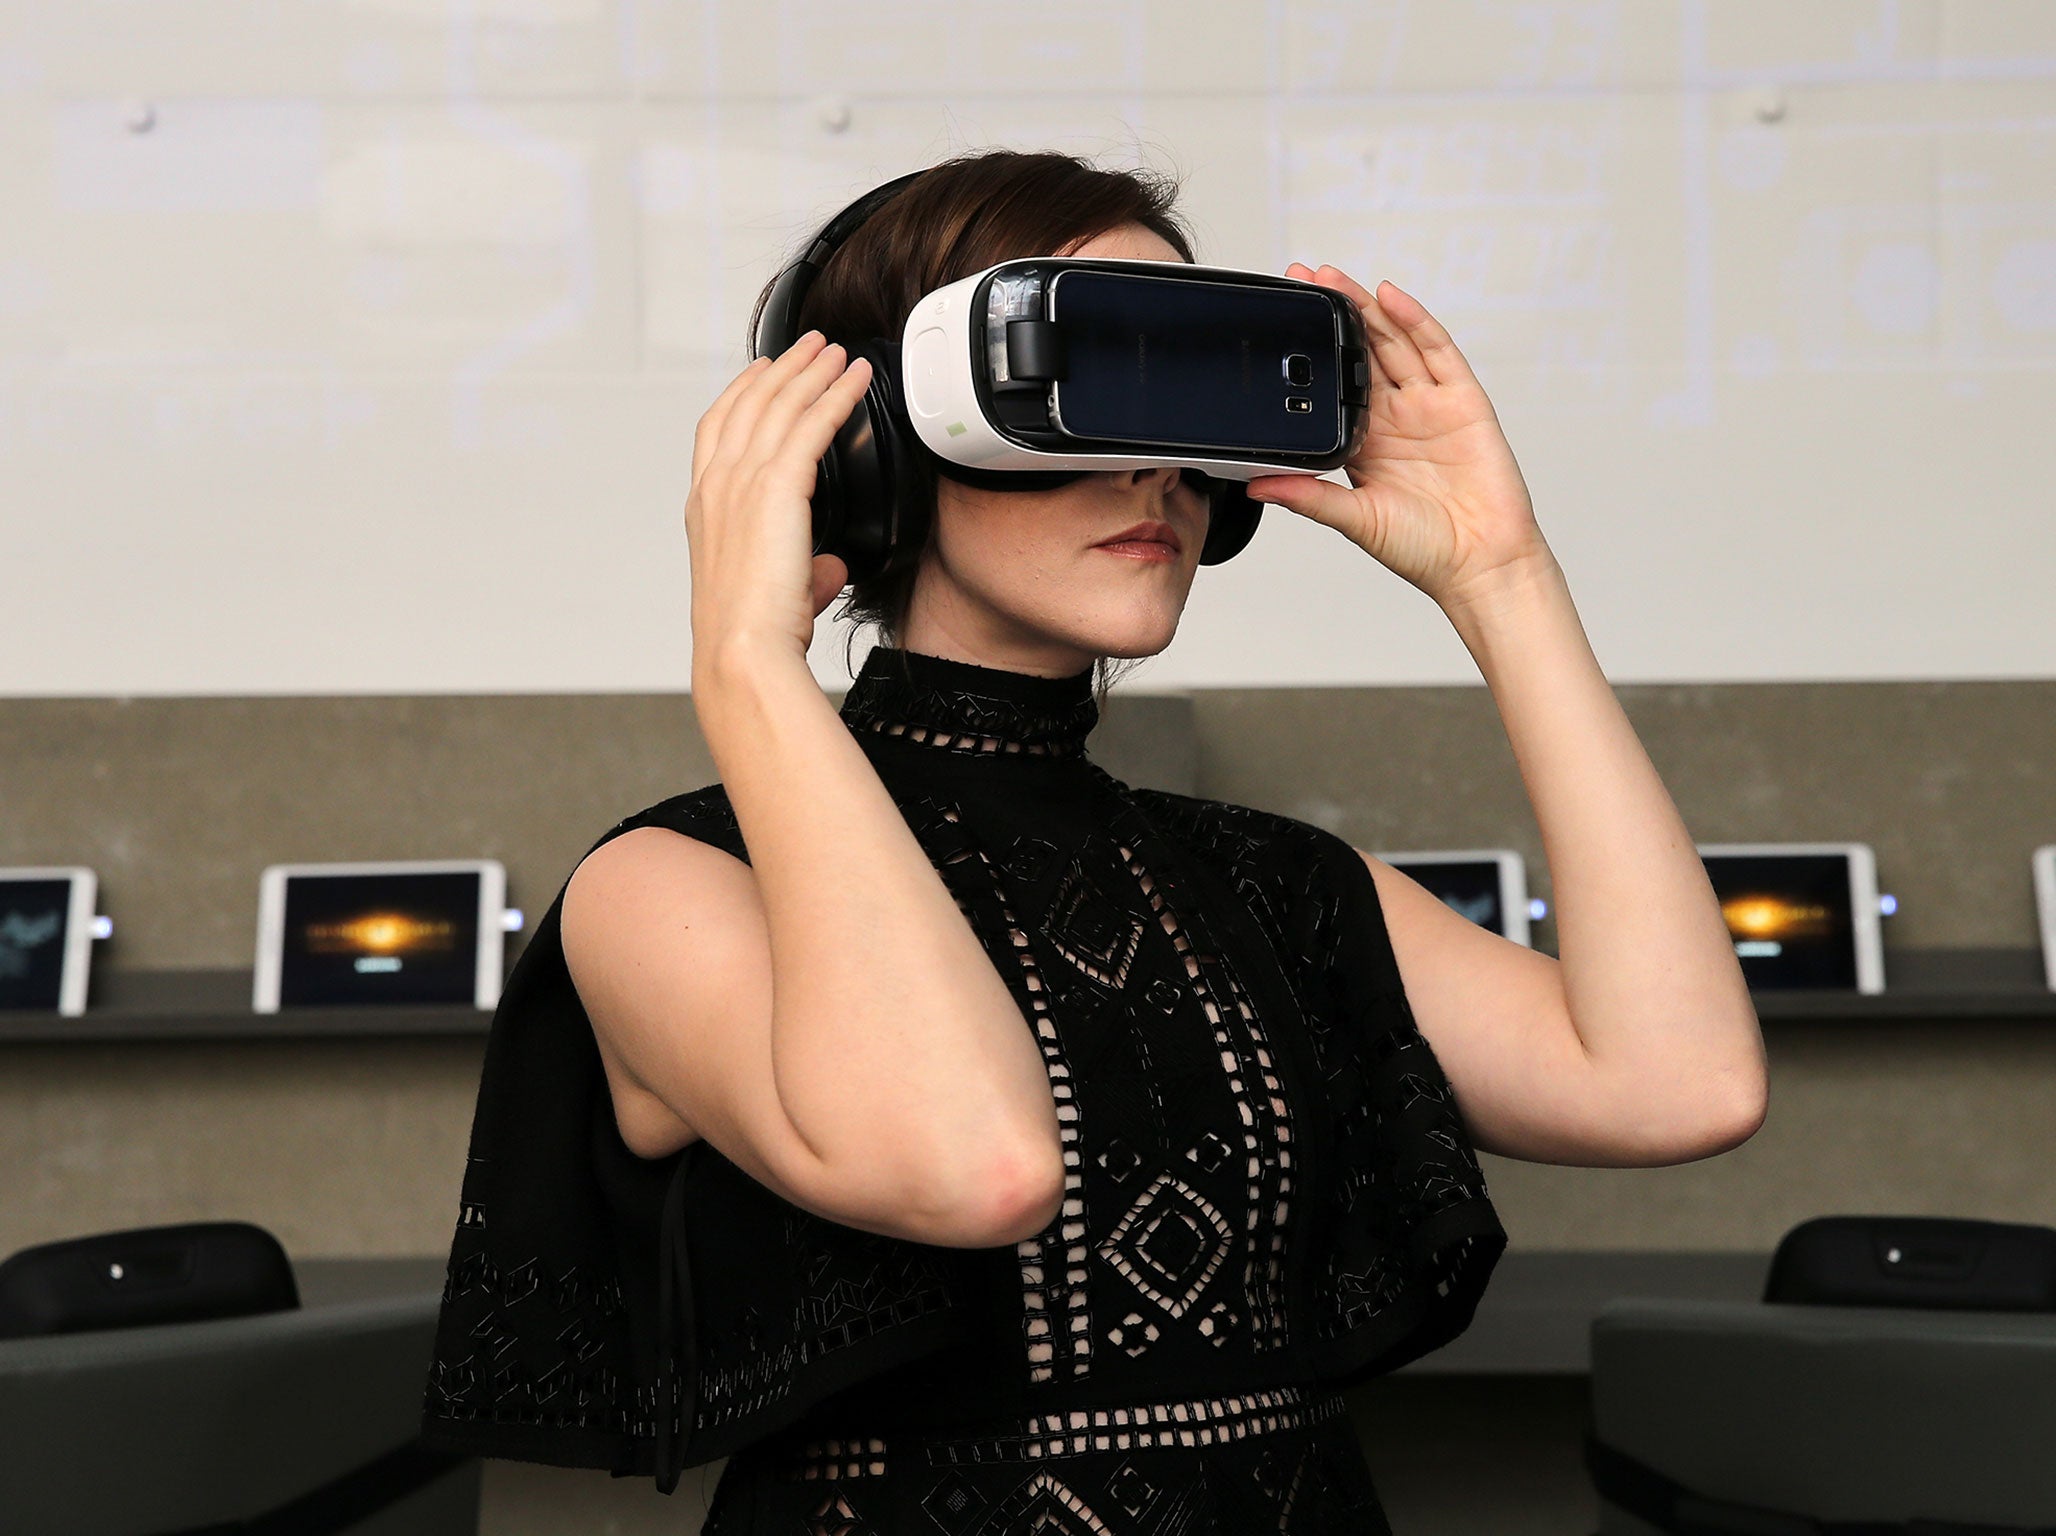 Jena Malone checks out 360-degree digital content using the Samsung Gear VR